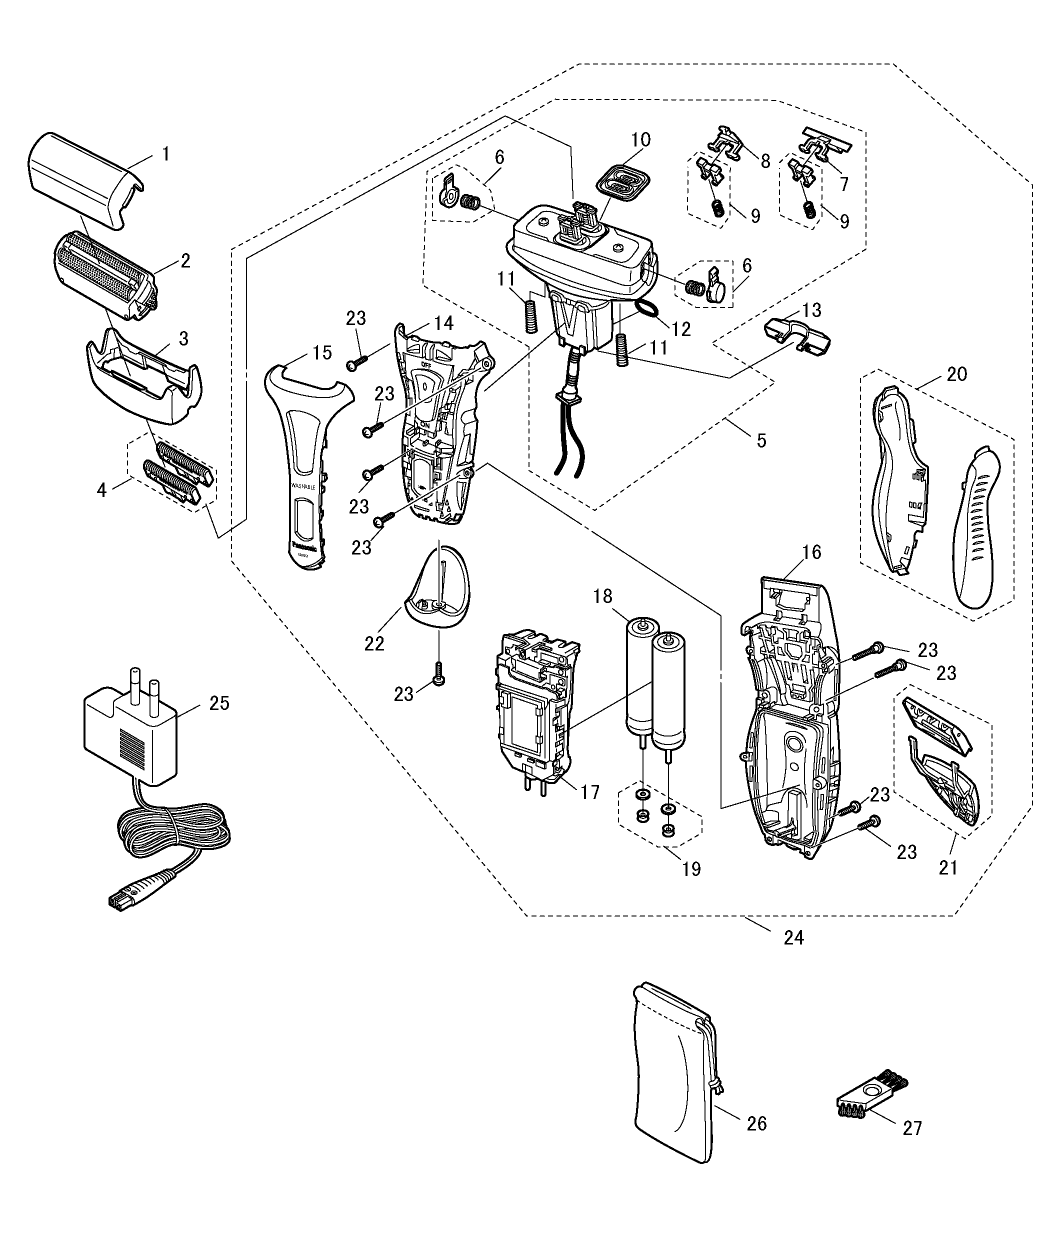 ES-RT31: Exploded View